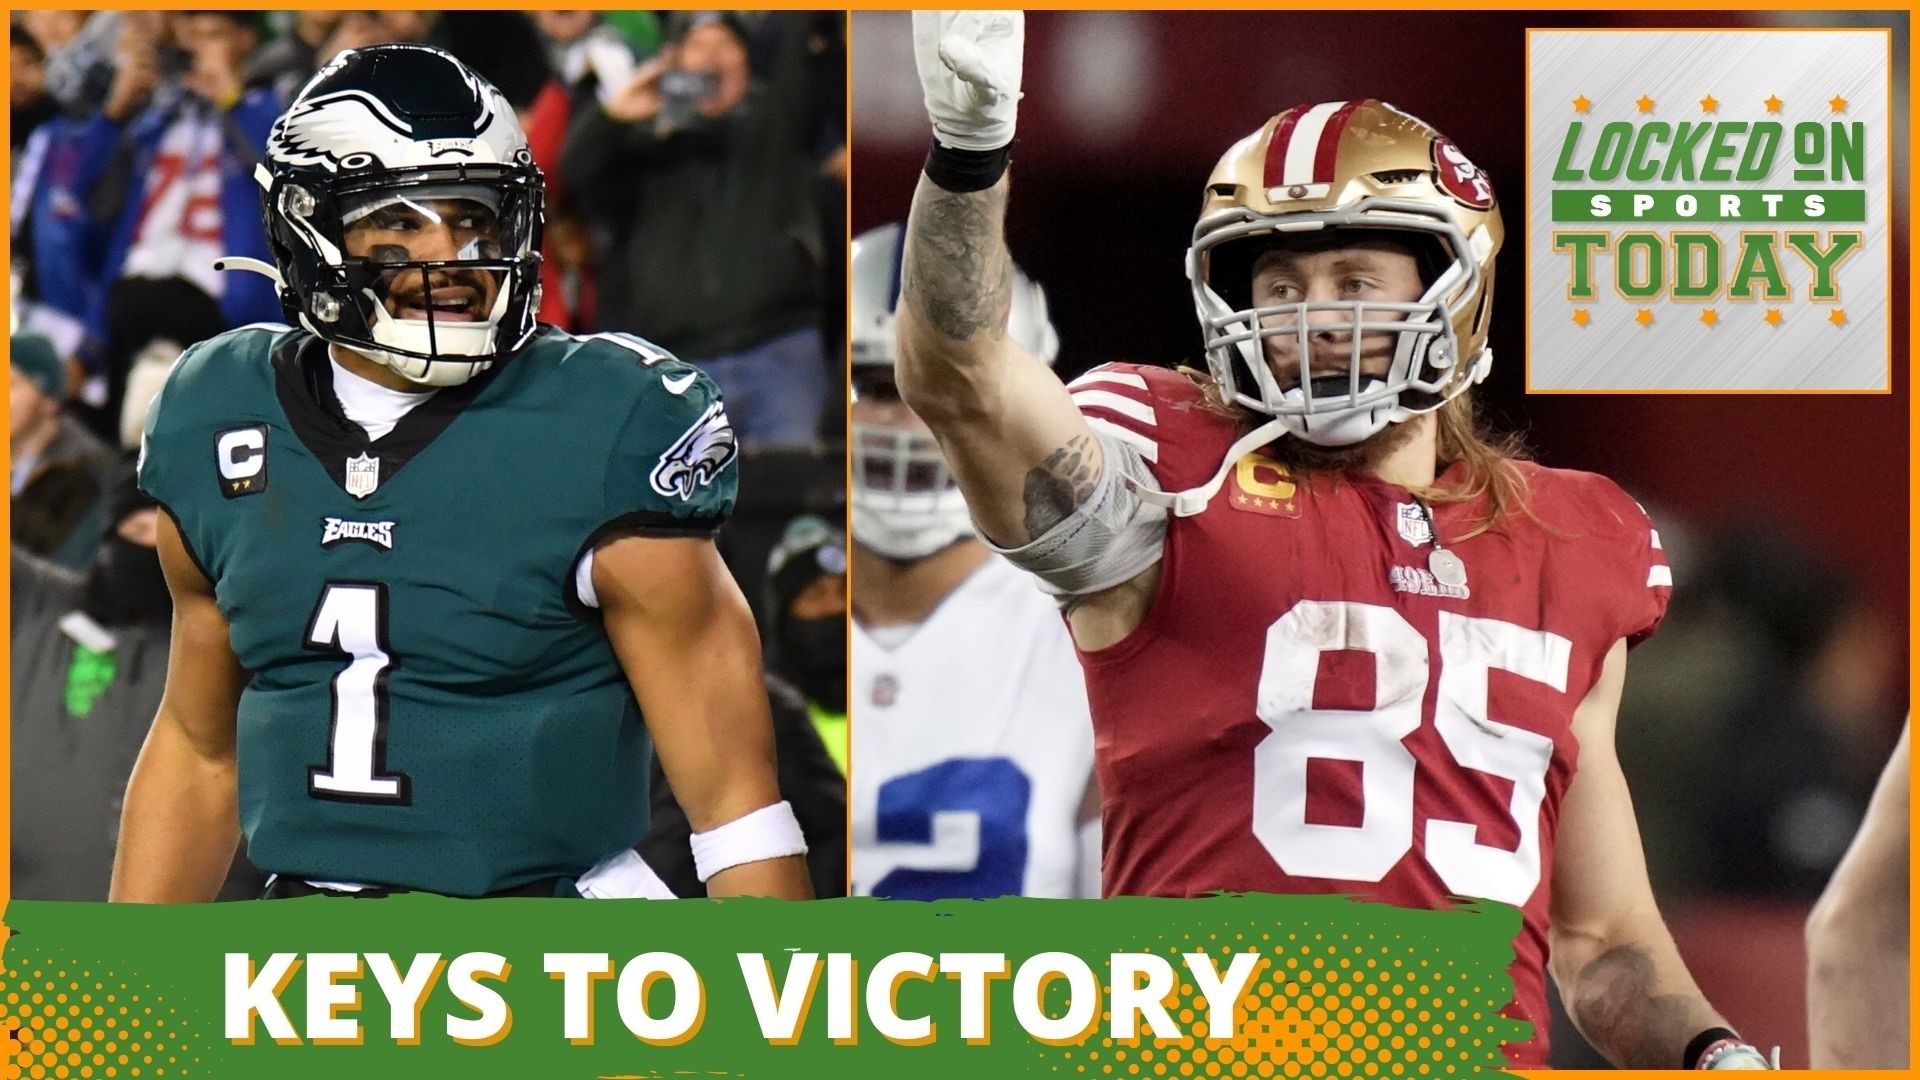 Discussing the day's top sports stories from the biggest factor that could lead the Eagles over the 49ers to the Bengals look to beat the Chiefs for the 4th time.